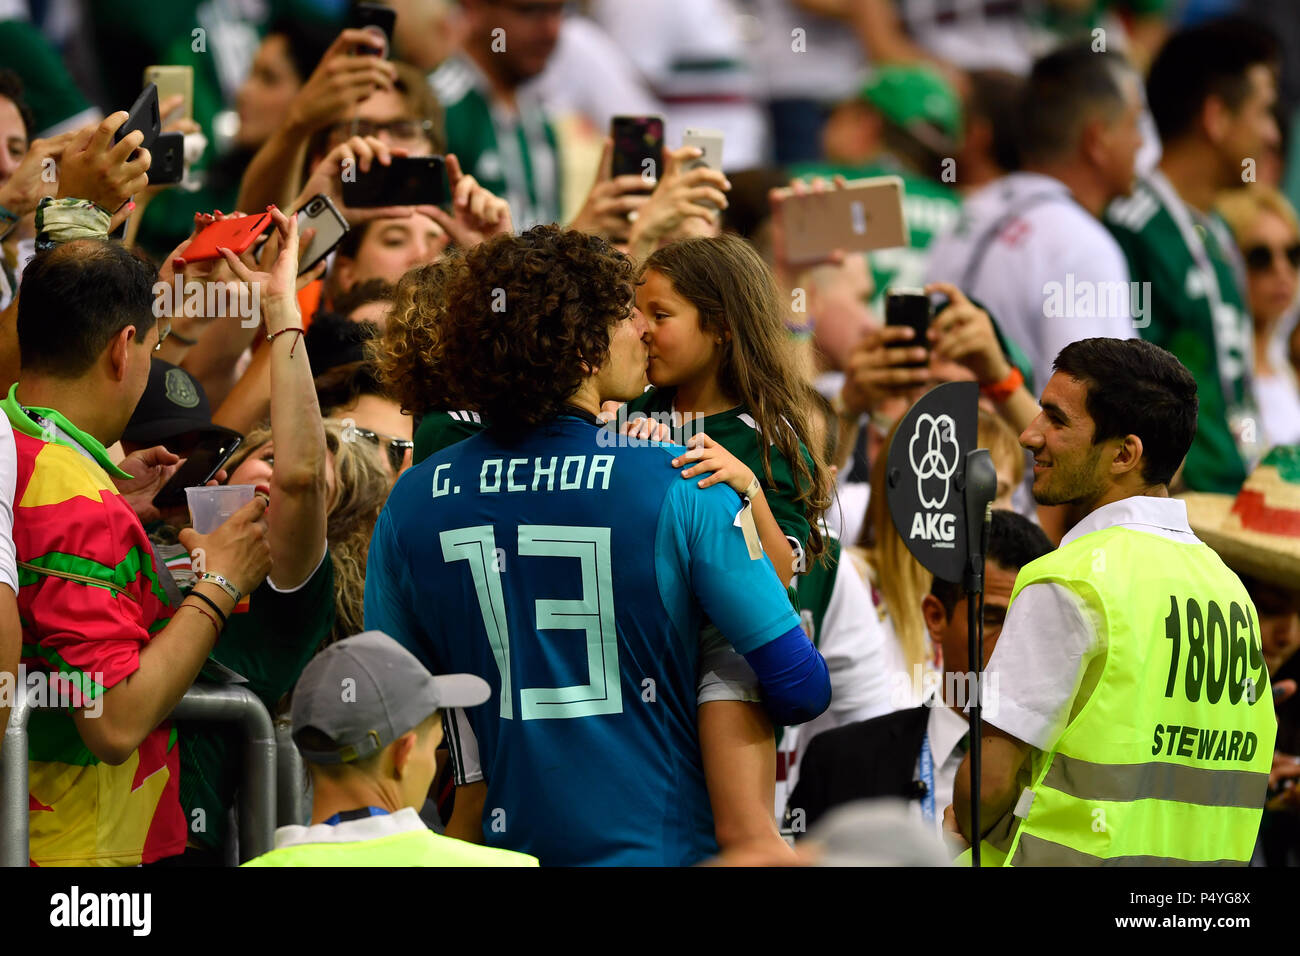 Rostov-on-Don, Russia. 23rd June, 2018. Soccer, FIFA World Cup 2018, South Korea vs Mexico, group stages, Group F, 2nd matchday at the Rostov-on-Don Stadium: Goalkeeper of Mexico Guillermo Ochoa kisses a child after the match. Credit: Marius Becker/dpa/Alamy Live News Stock Photo